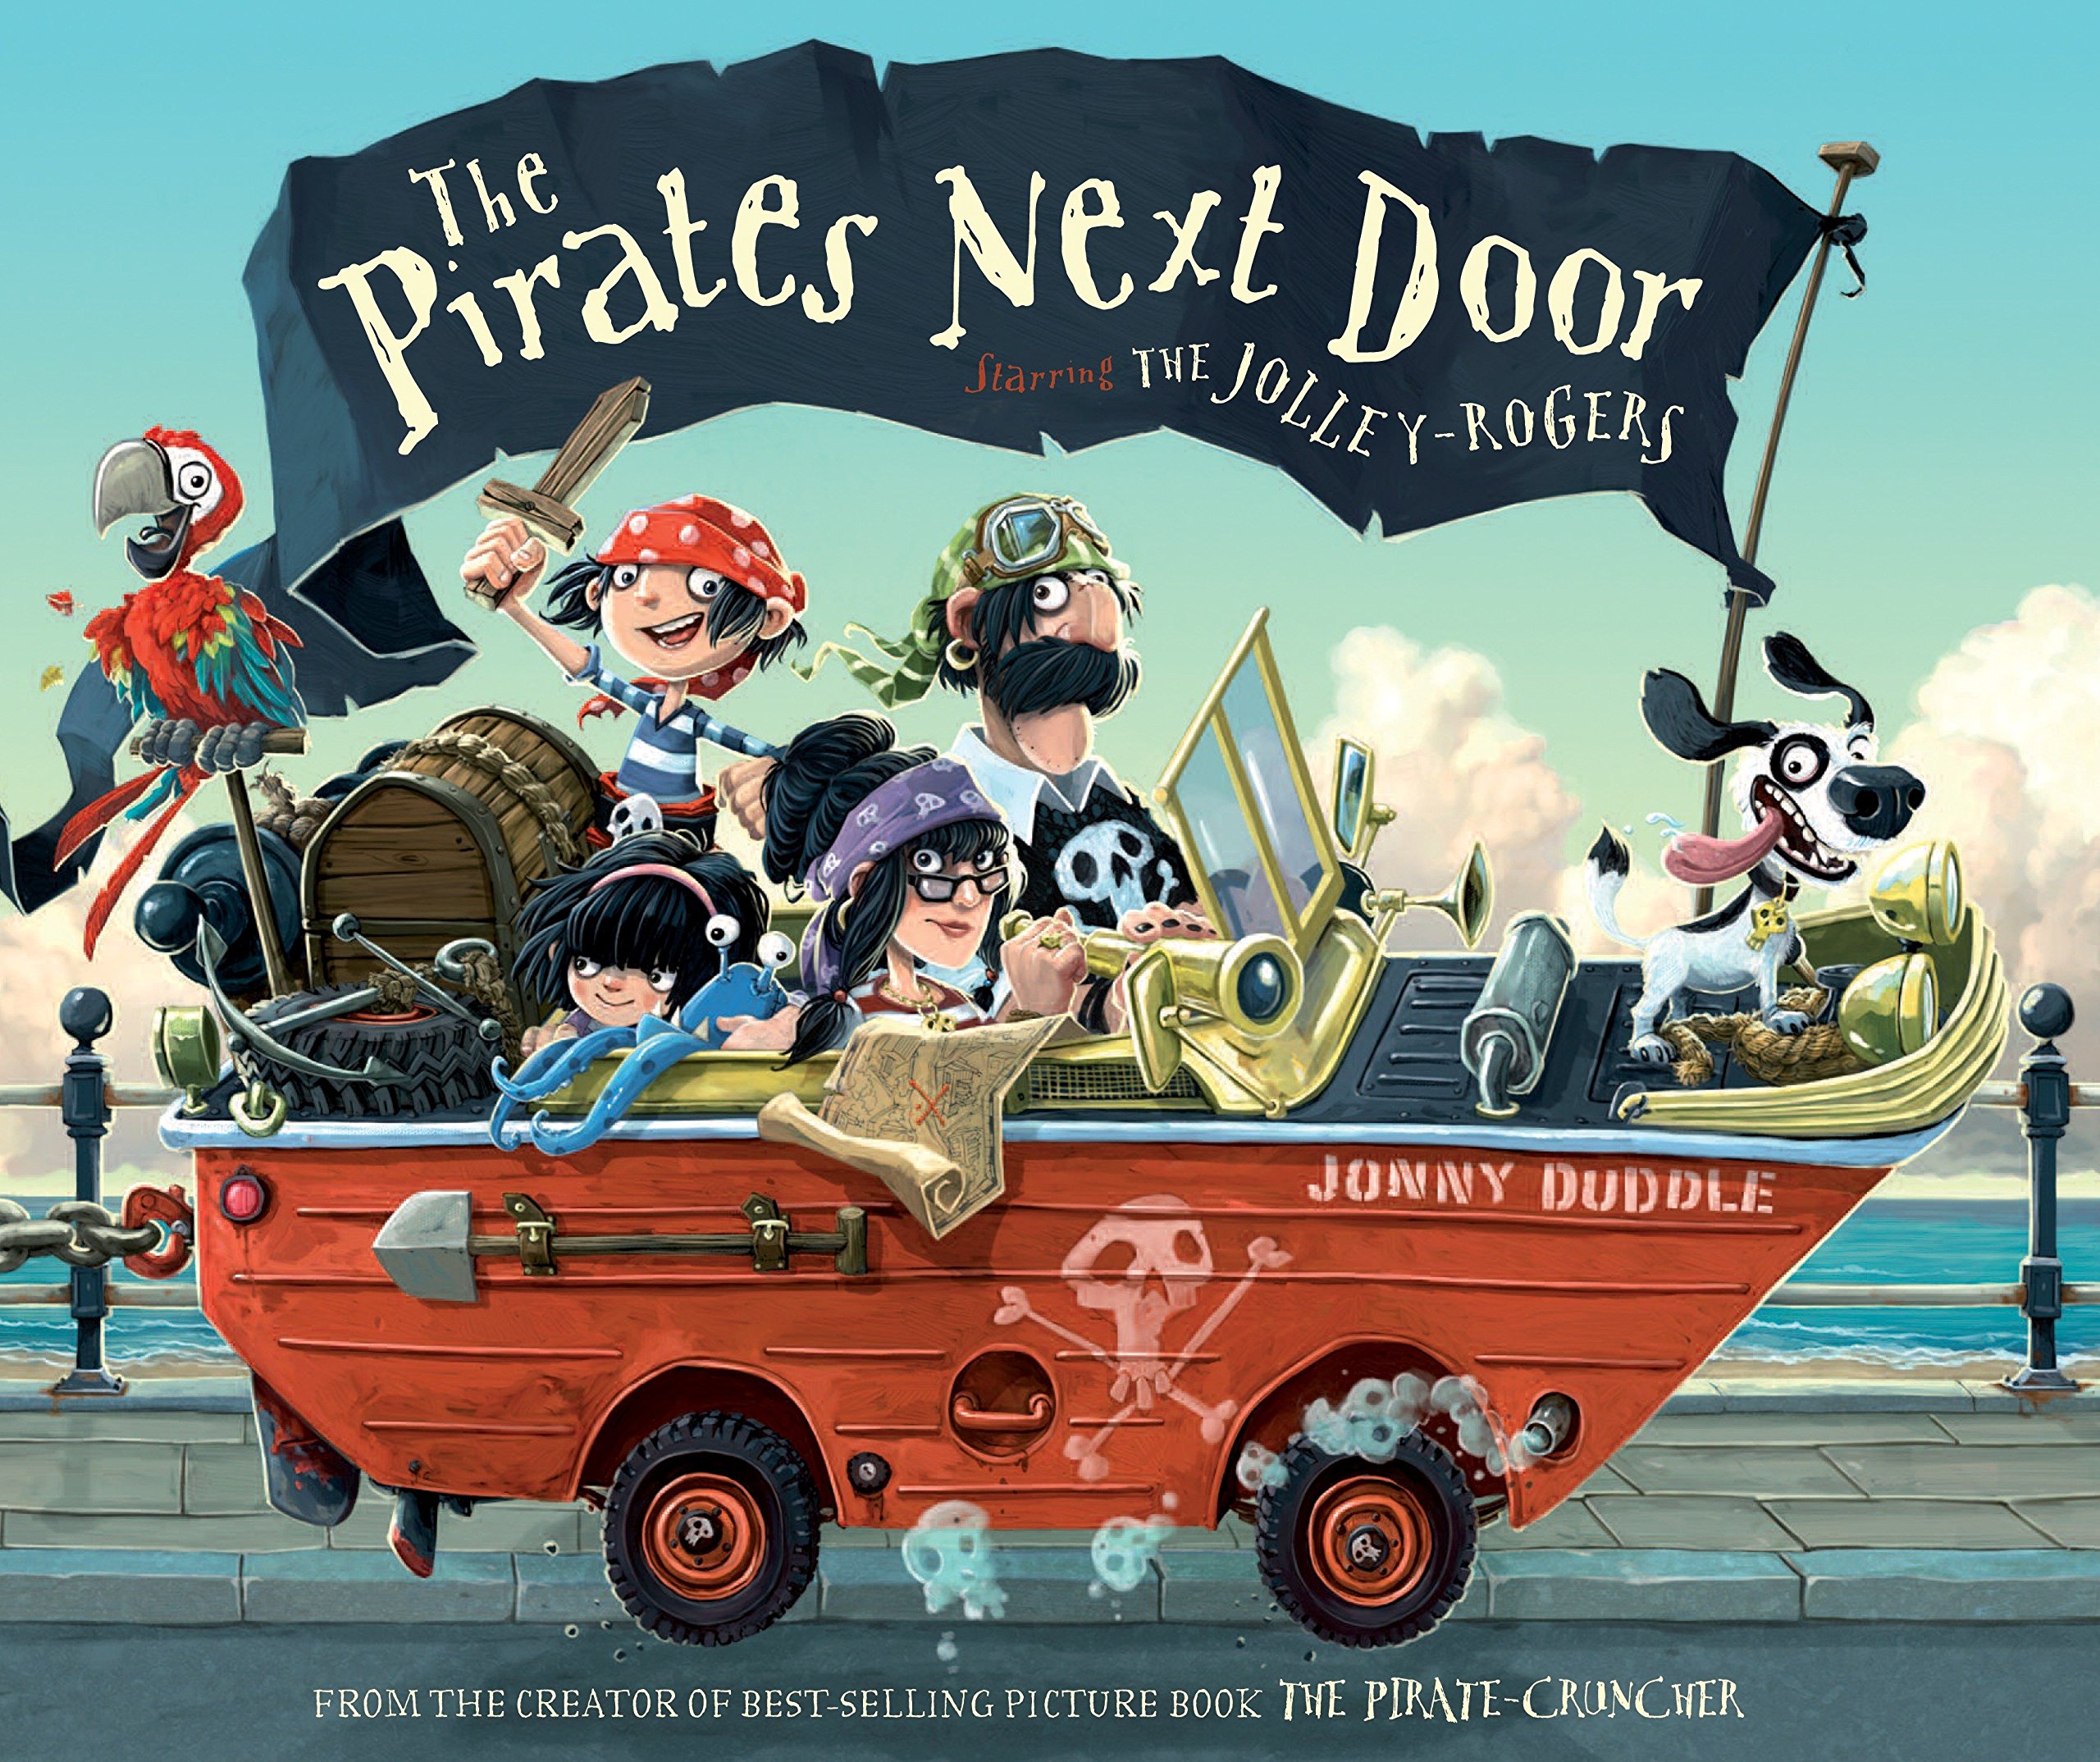 speech and language teaching concepts for The Pirates Next Door in speech therapy